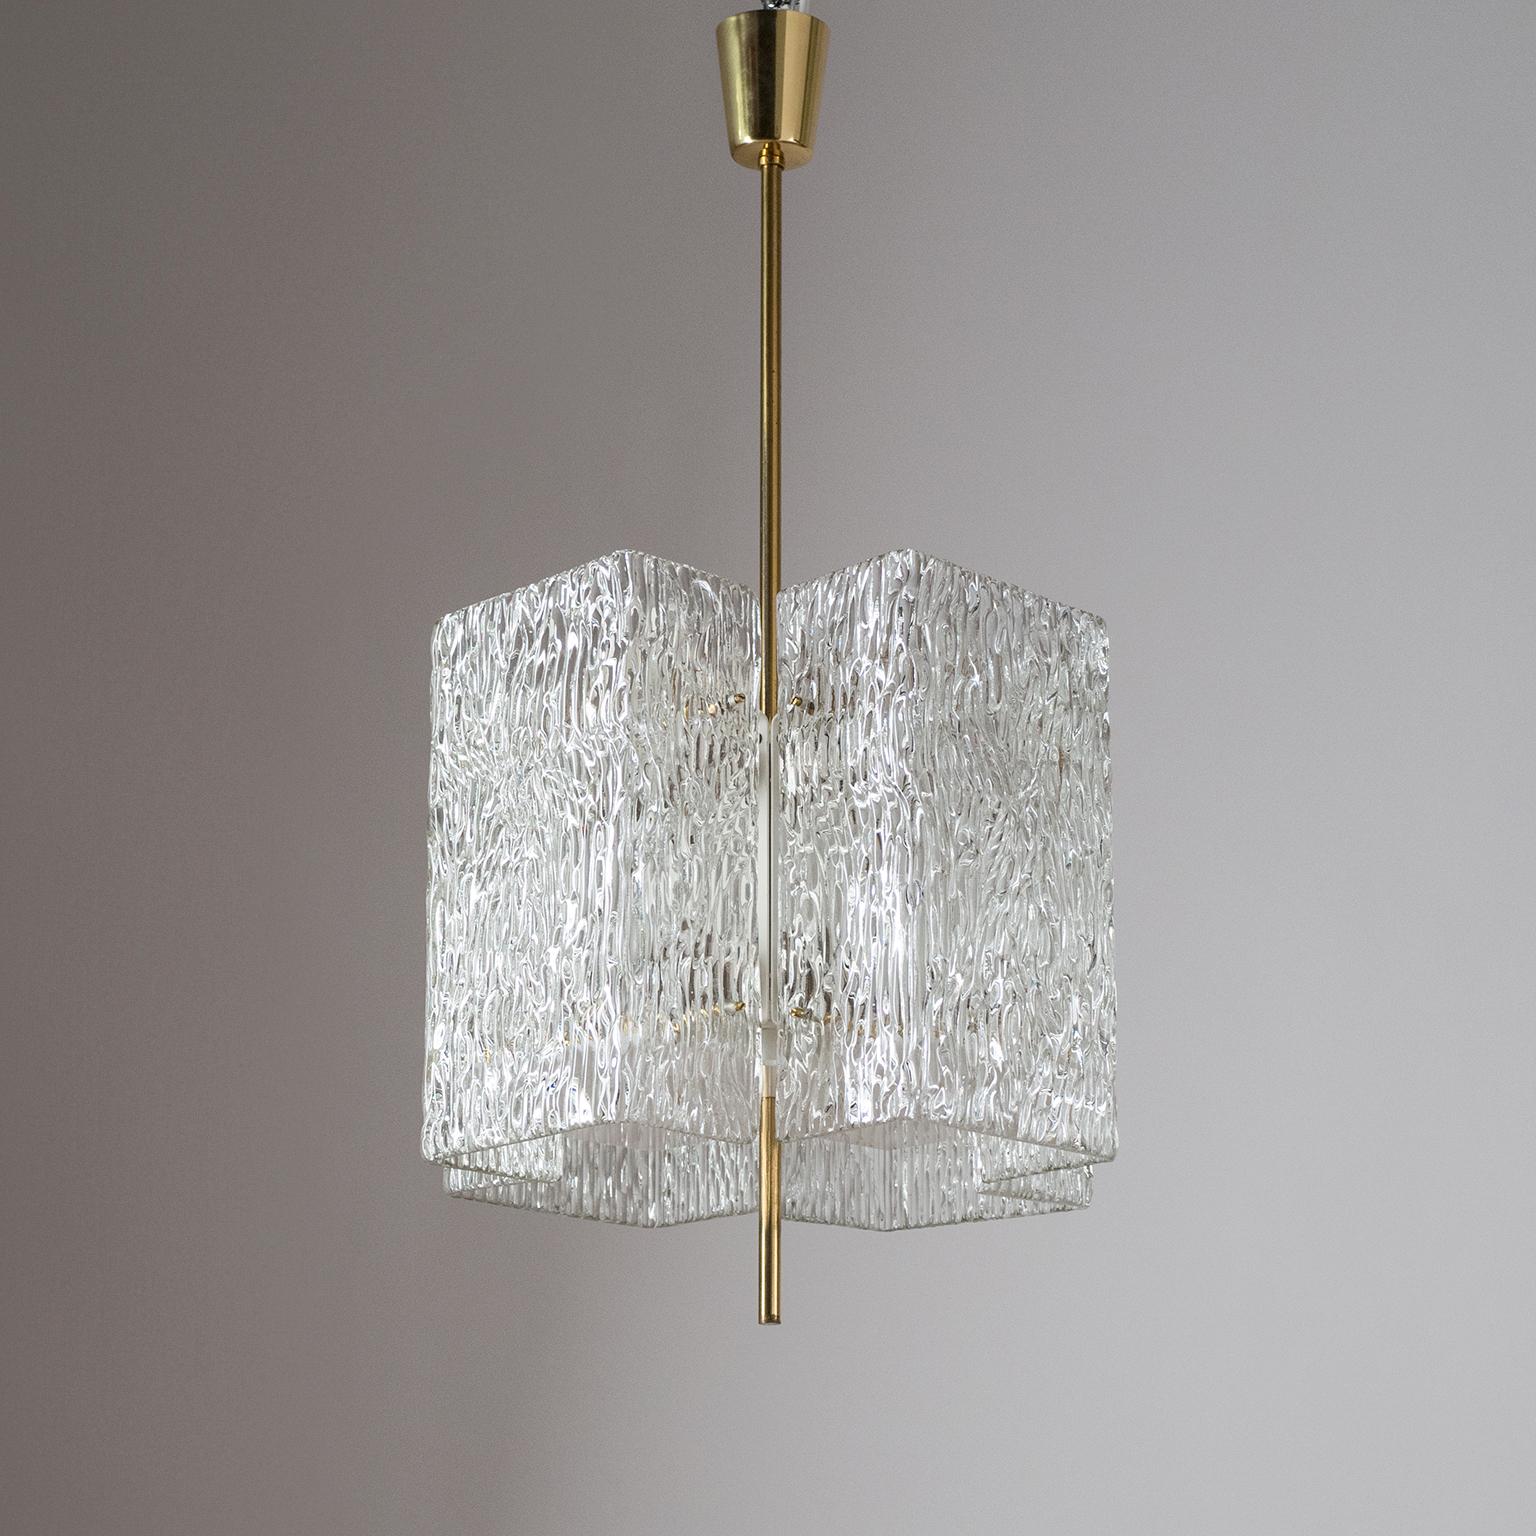 Rare chandelier by J.T. Kalmar from the 1950s. Signature Kalmar textured glass Diffusers consisting arranged in a 